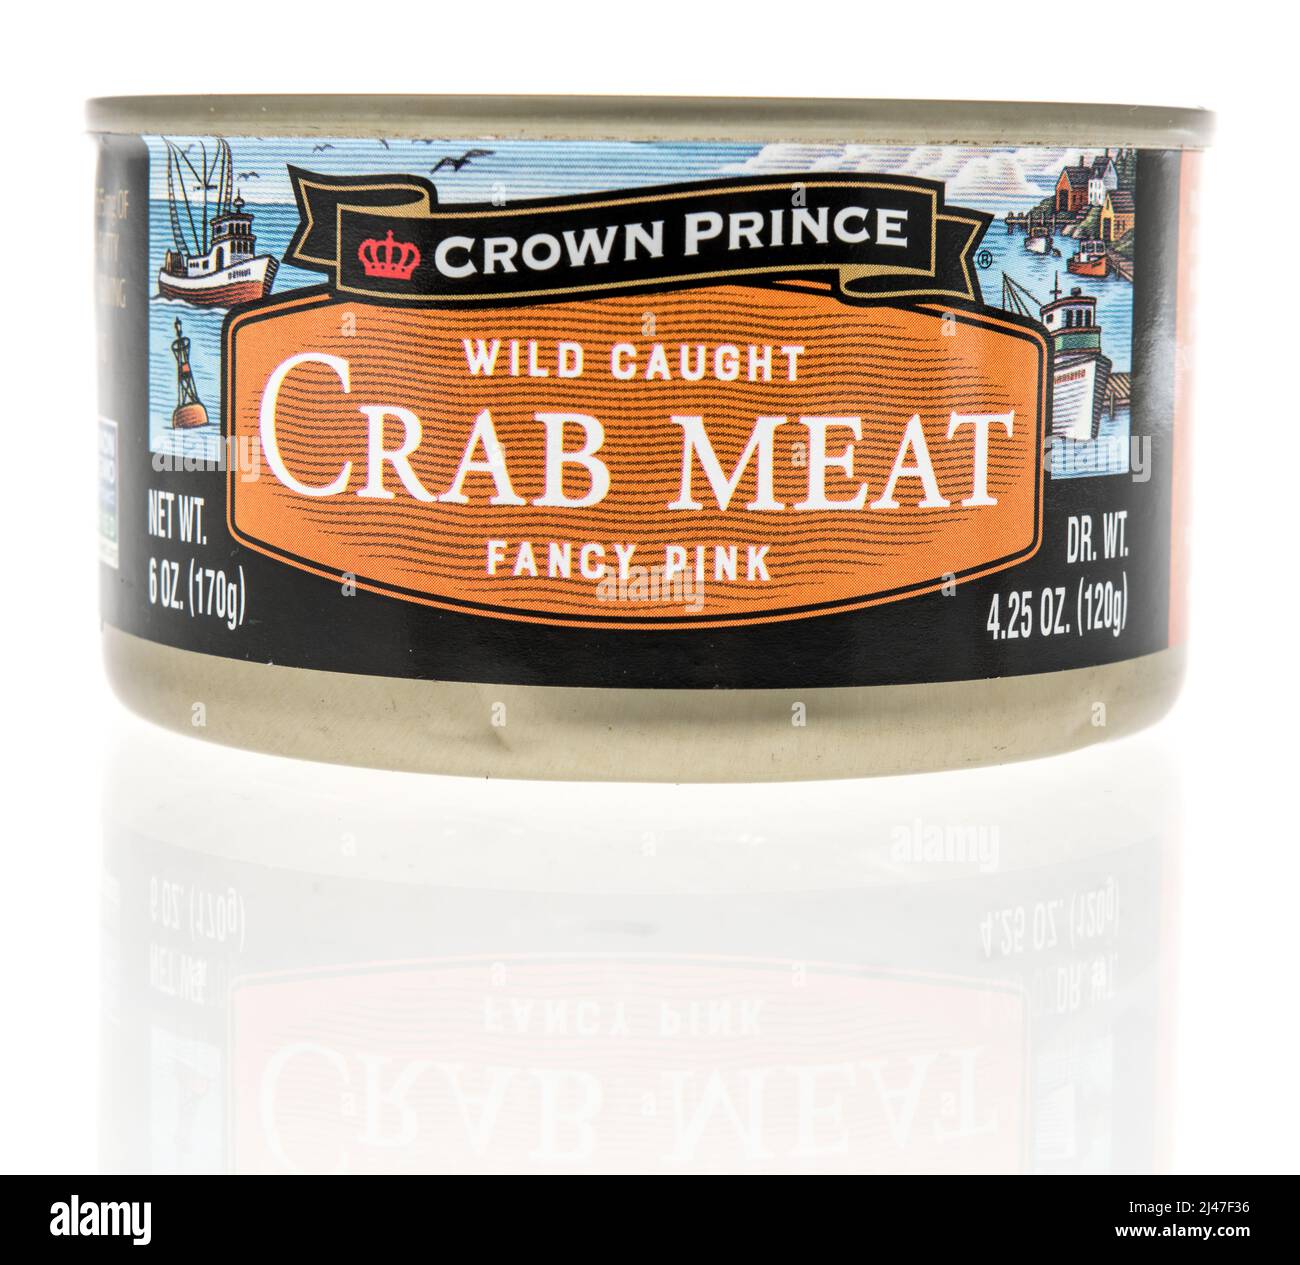 Winneconne, WI -10 April 2022: A can of Crown Prince wild caught pink crab meat on an isolated background Stock Photo